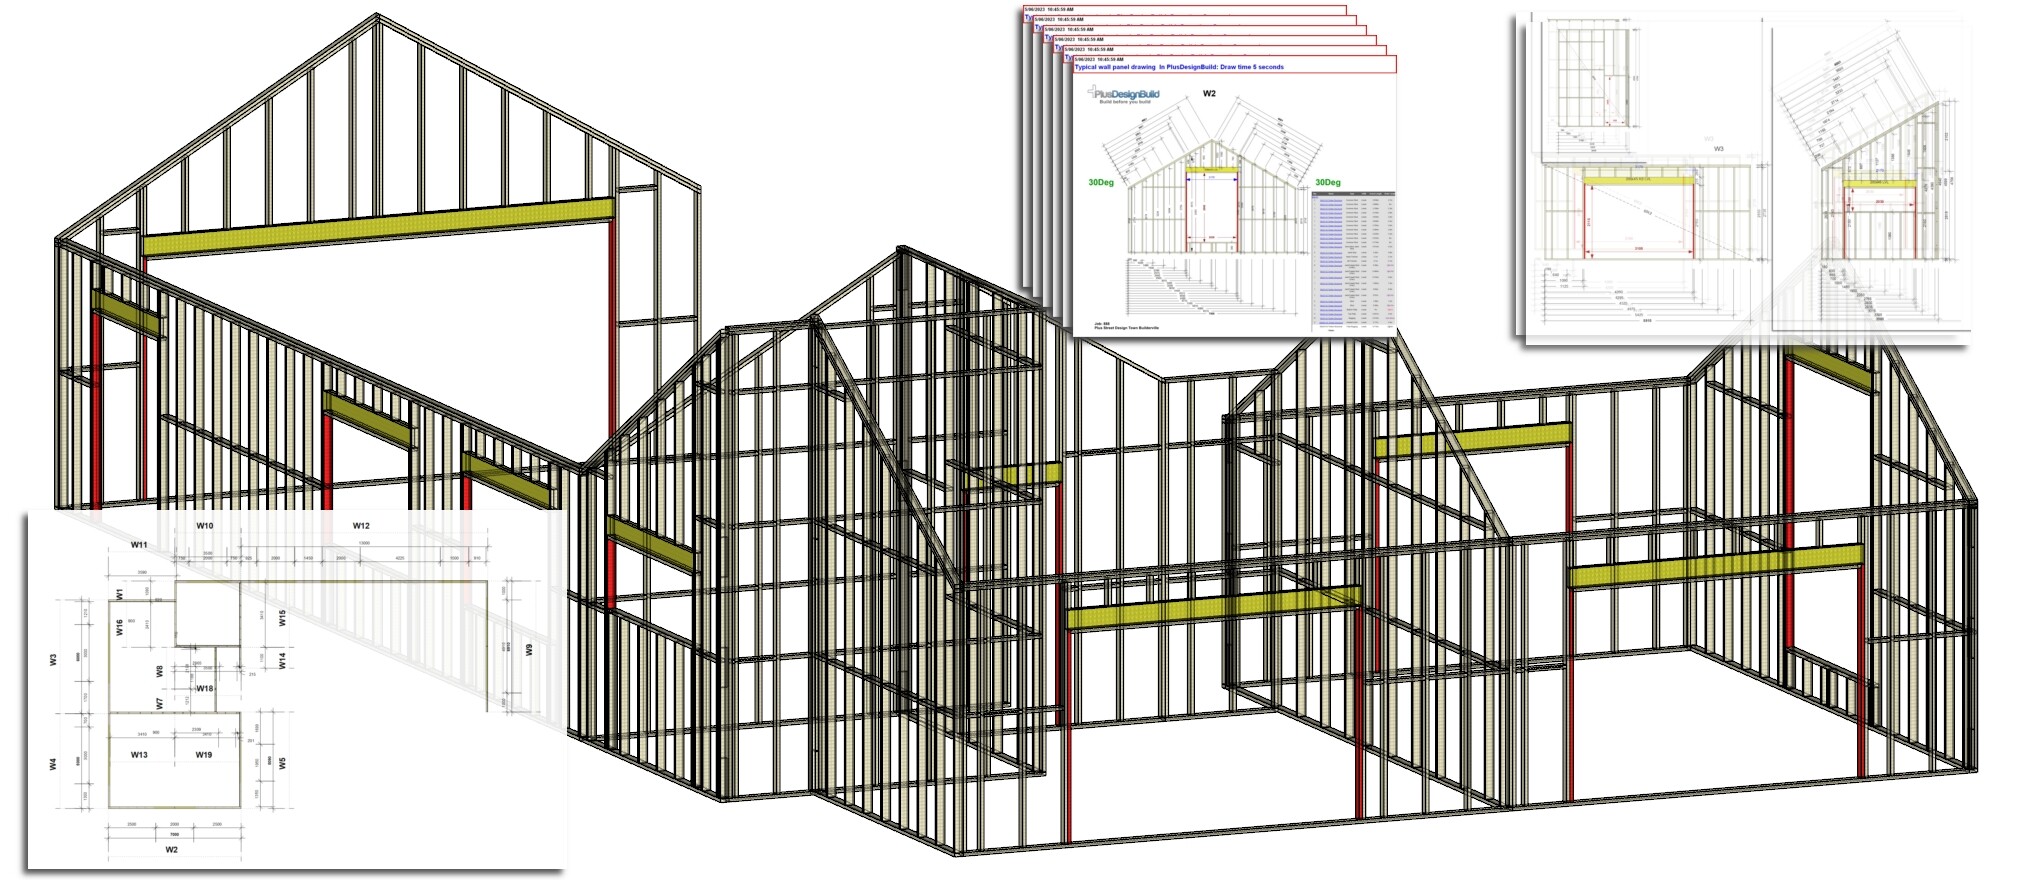 Wall frame panel  drawing and estimating example for pre fabricated frames drawn in PlusDesignBuild for Sketchup.jpg